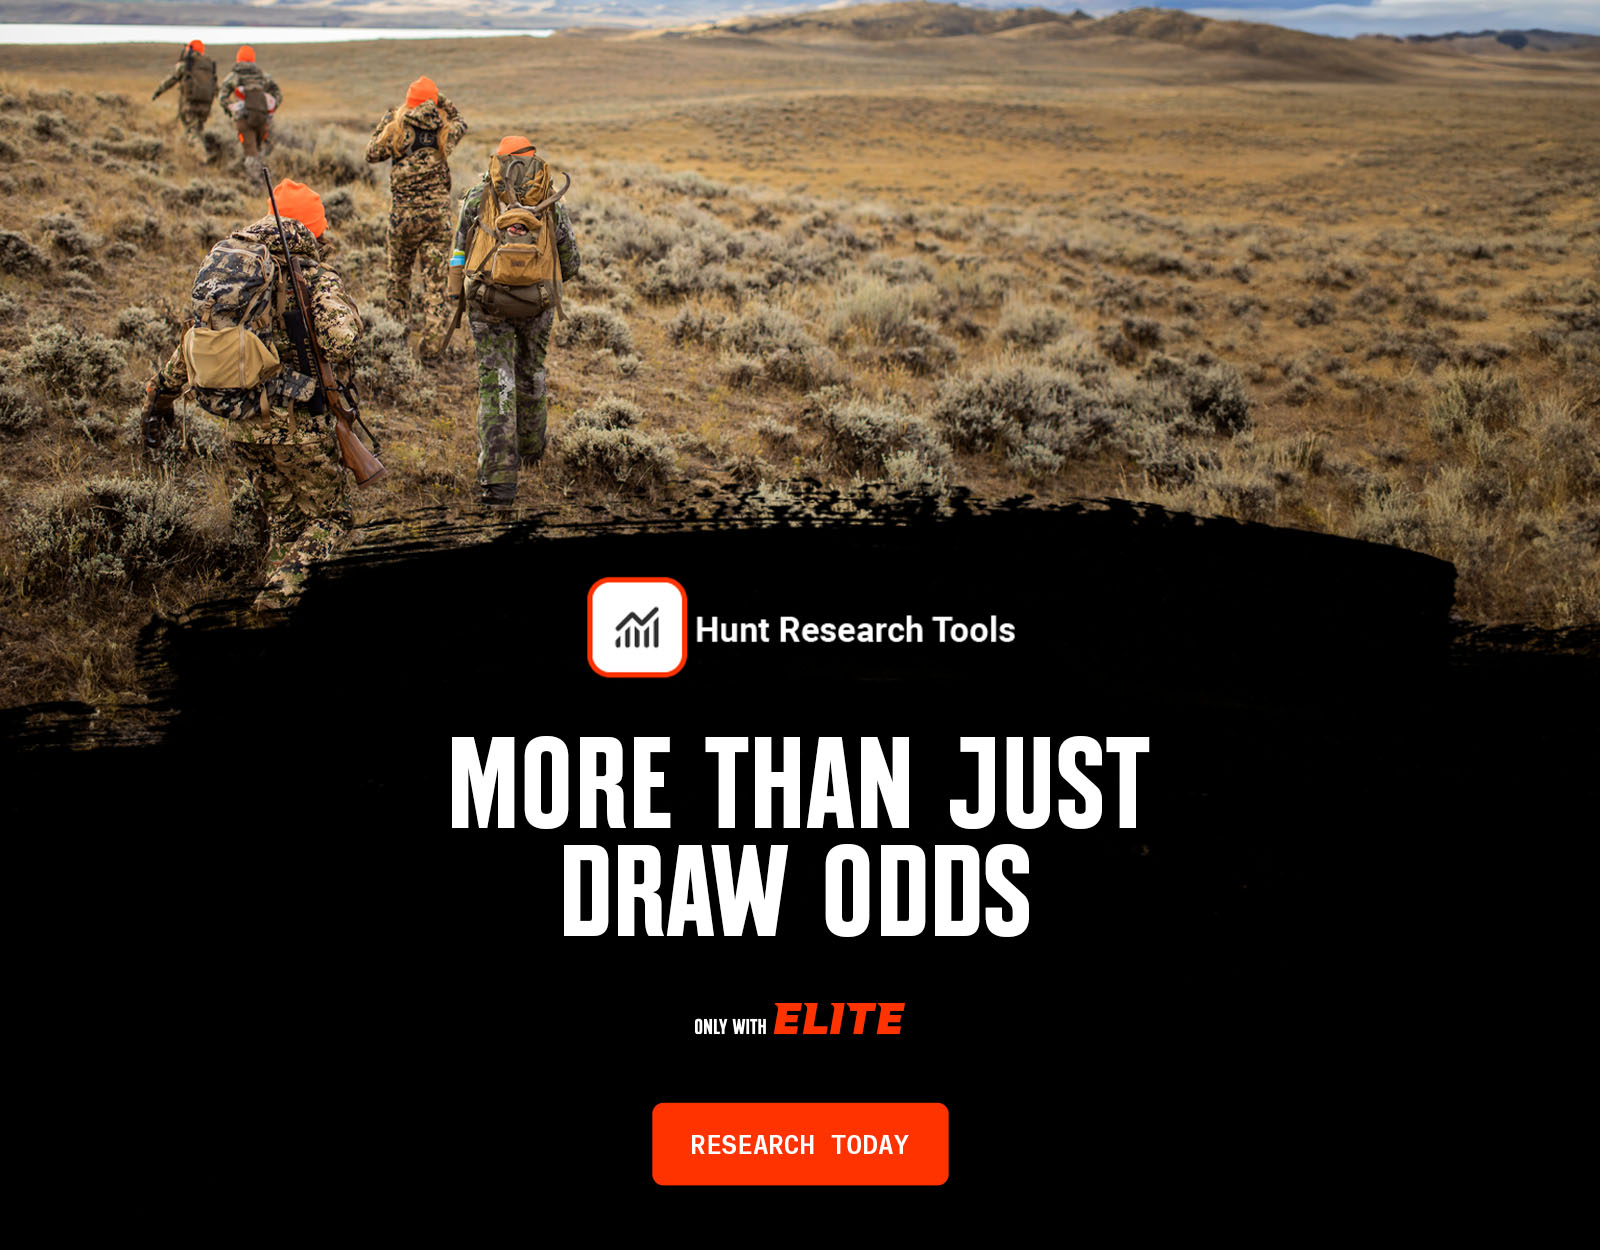 Infographic promoting onX Hunt Research Tools for Elite Members.